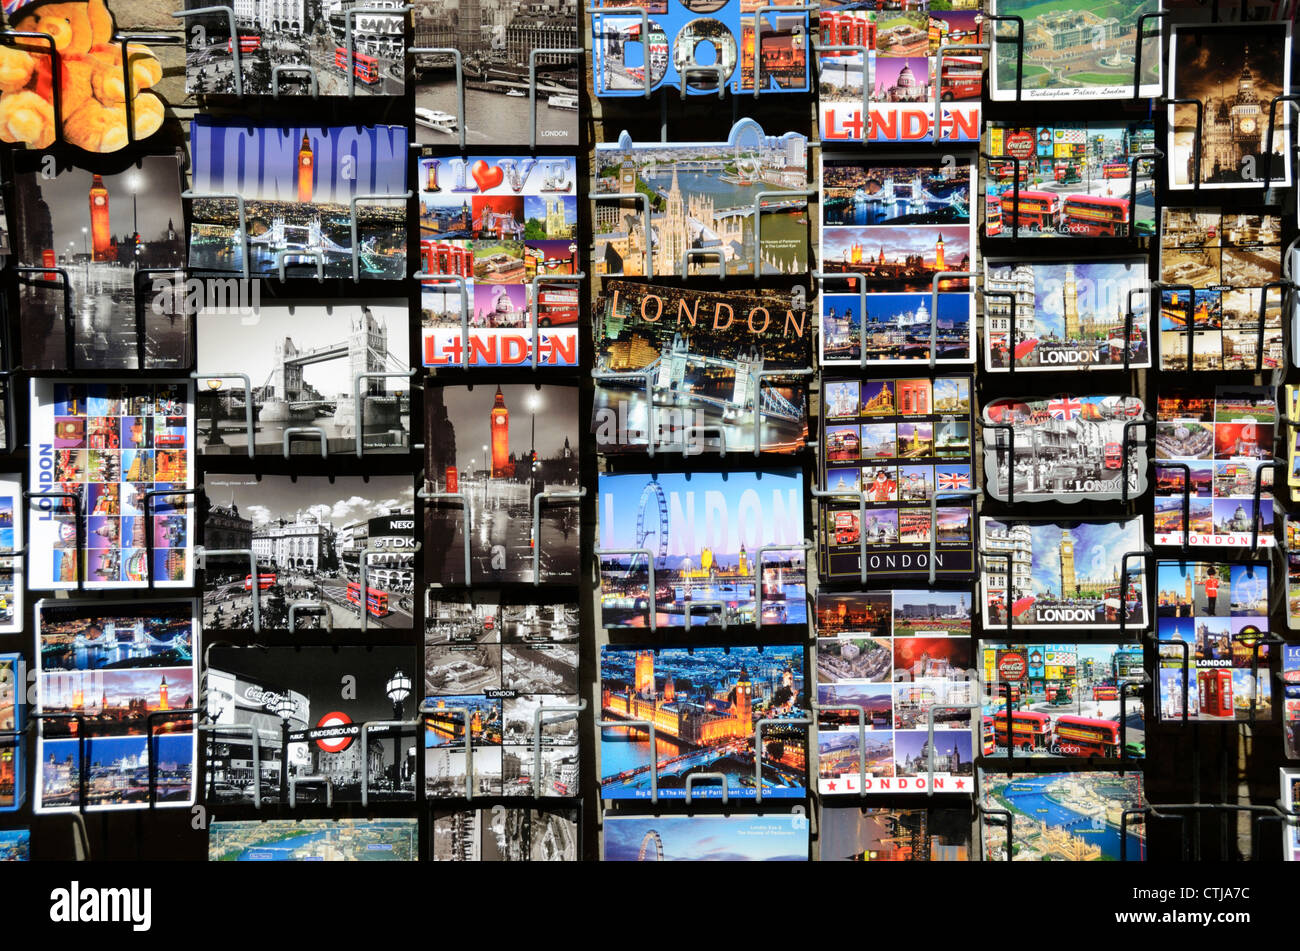 London postcards showing iconic tourist locations Stock Photo